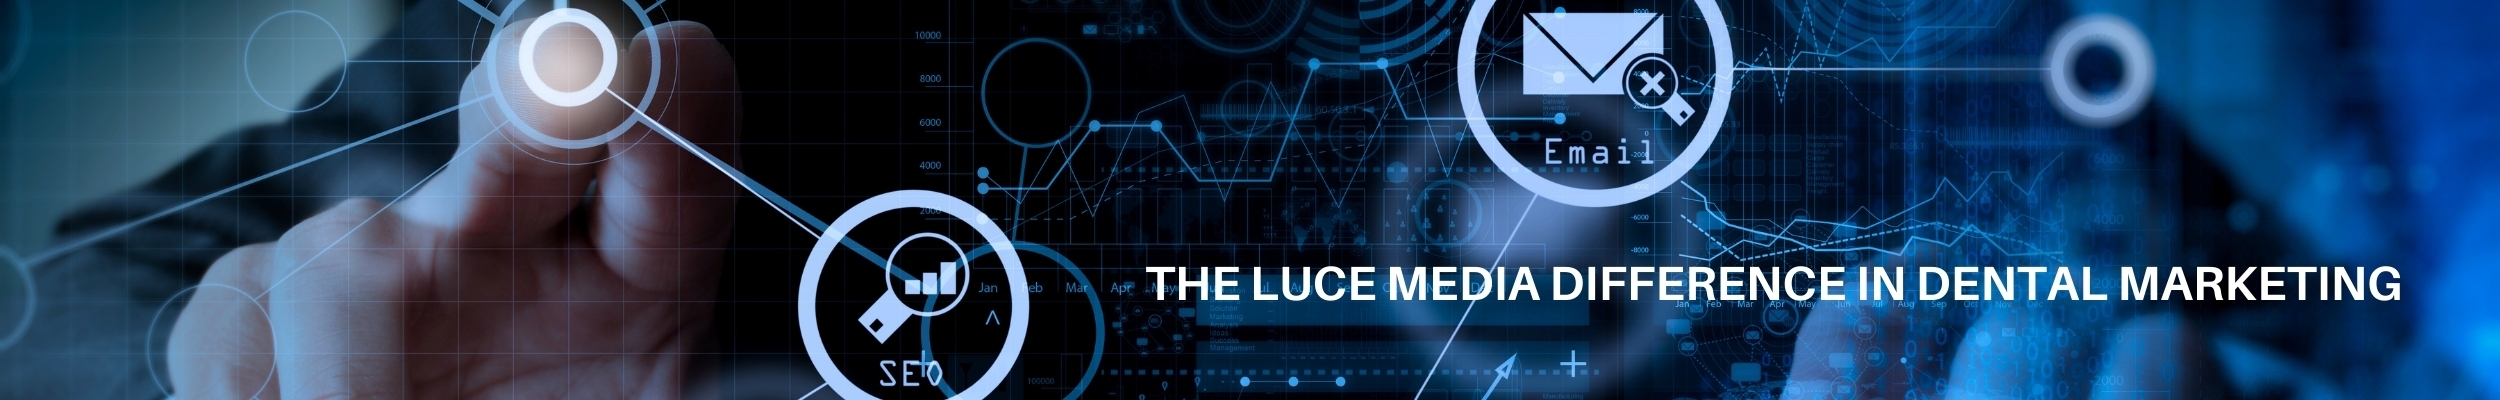 Luce Media the difference in dental marketing